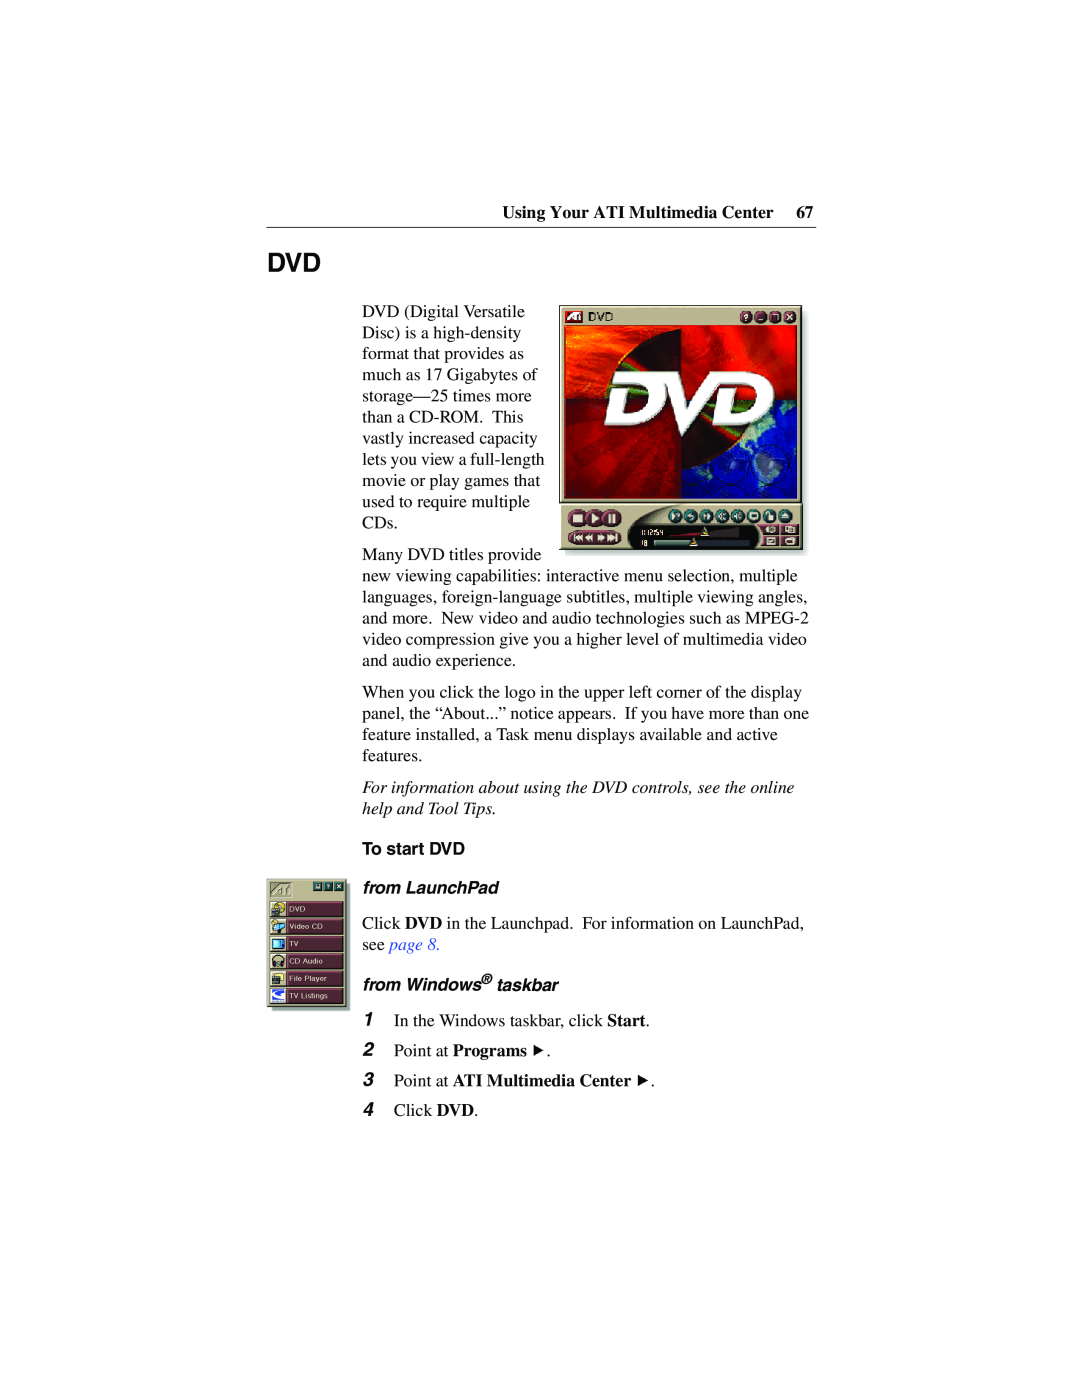 ATI Technologies 137-40188-60 specifications To start DVD, see page, Using Your ATI Multimedia Center, from LaunchPad 